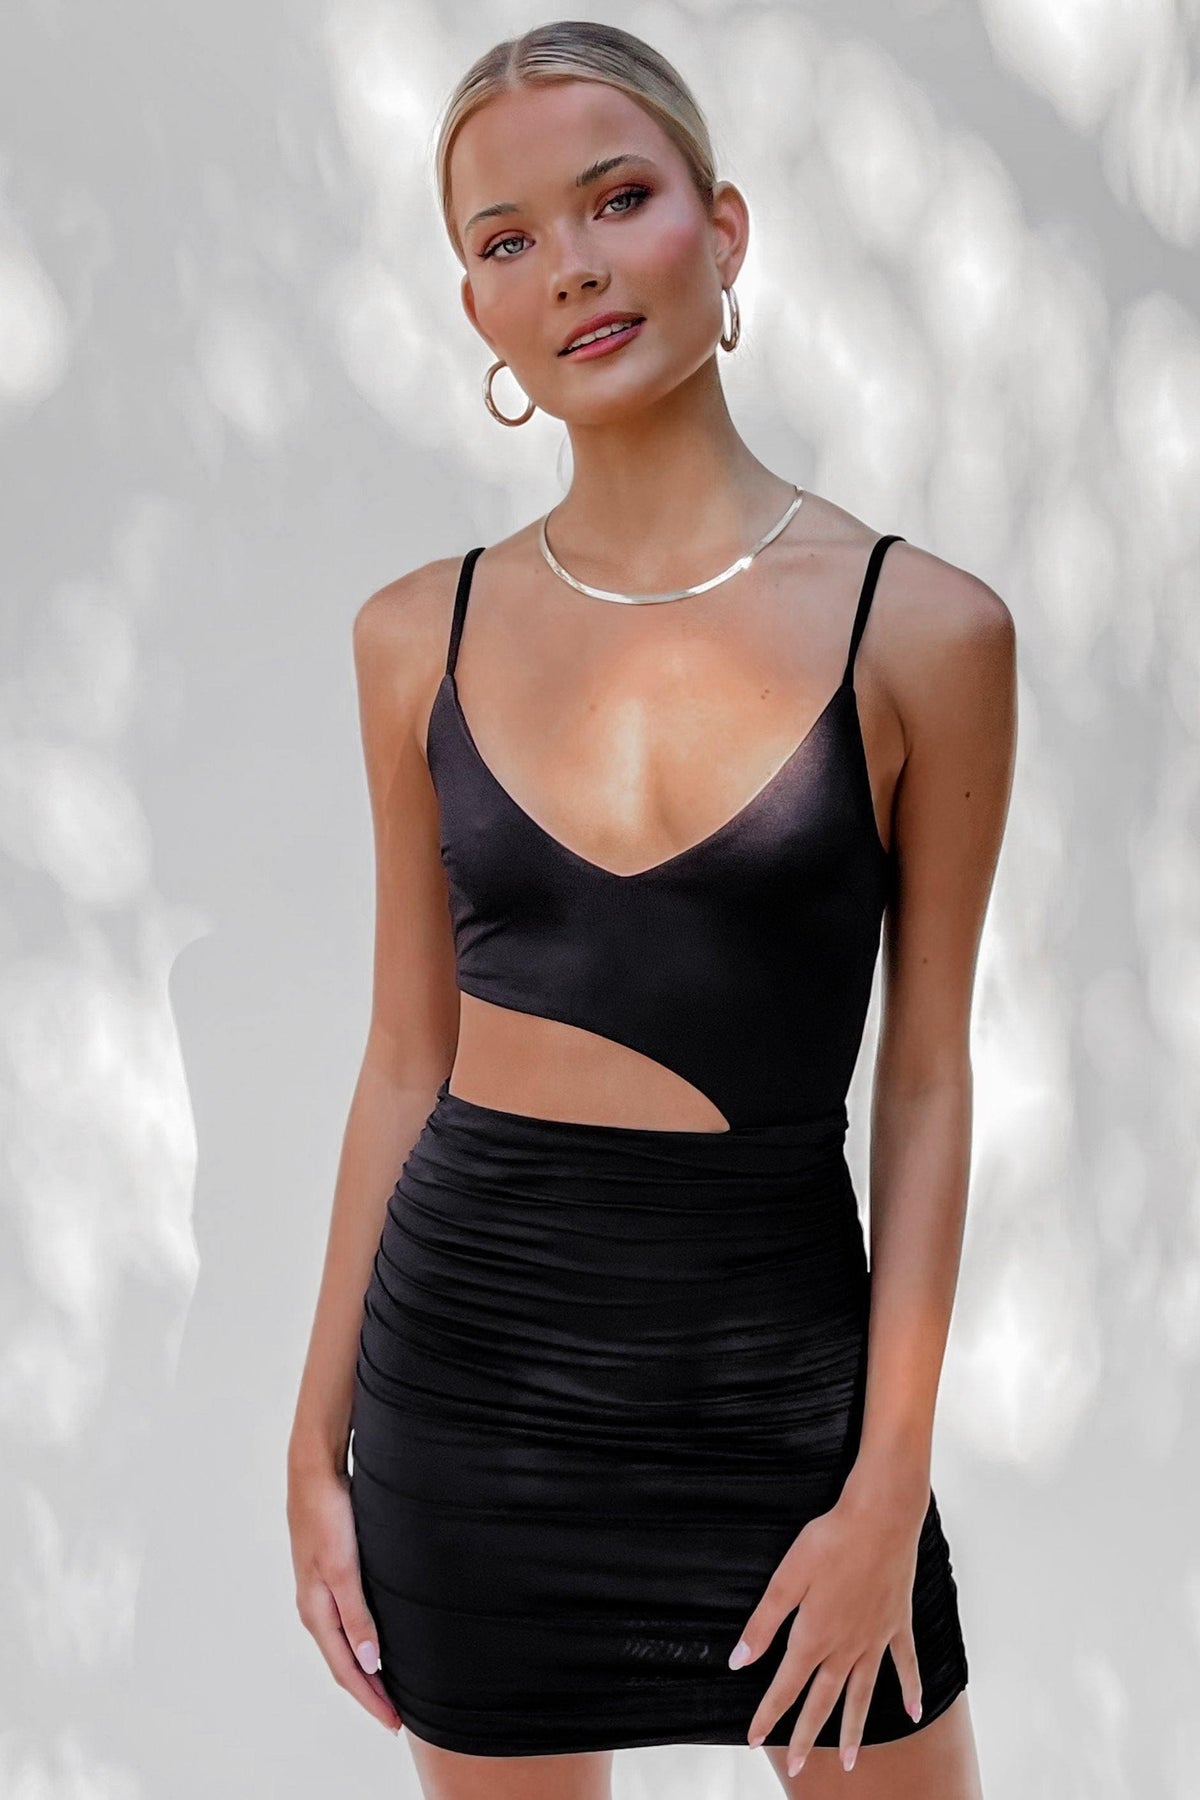 Stacey Dress, BASICS, BLACK, BODYCON, CUT OUT, DRESS, DRESSES, GOING OUT, MINI DRESS, Sale, Stacey Dress only $56.00 @ MISHKAH ONLINE FASHION BOUTIQUE, Shop The Latest Women&#39;s Dresses - Our New Stacey Dress is only $56.00, @ MISHKAH ONLINE FASHION BOUTIQUE-MISHKAH